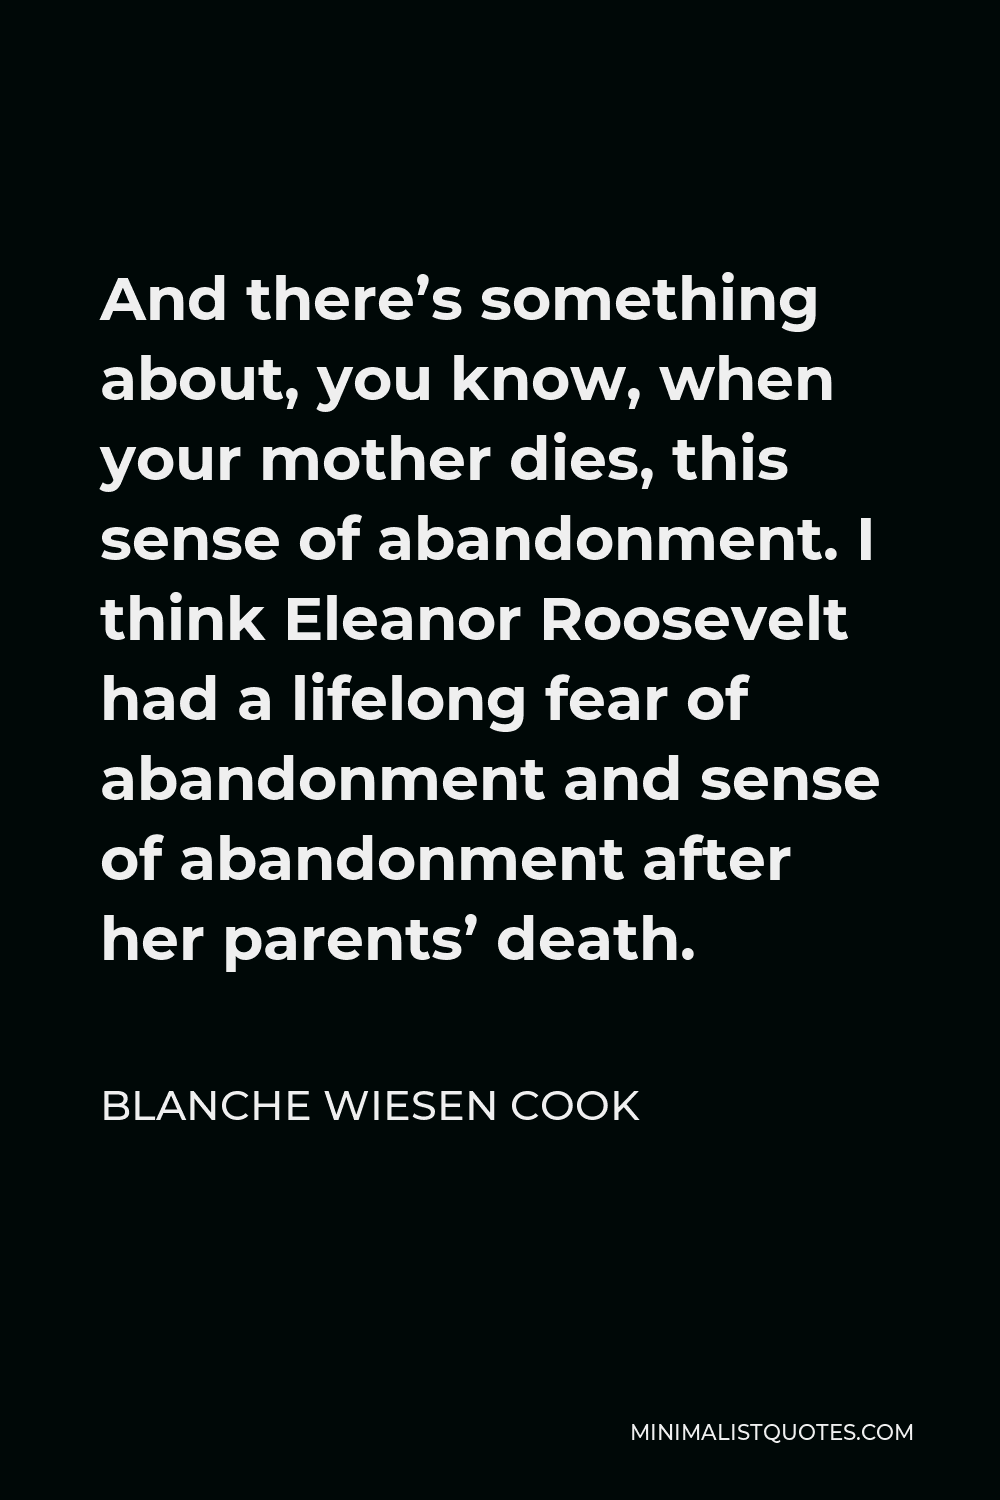 Blanche Wiesen Cook Quote - And there’s something about, you know, when your mother dies, this sense of abandonment. I think Eleanor Roosevelt had a lifelong fear of abandonment and sense of abandonment after her parents’ death.